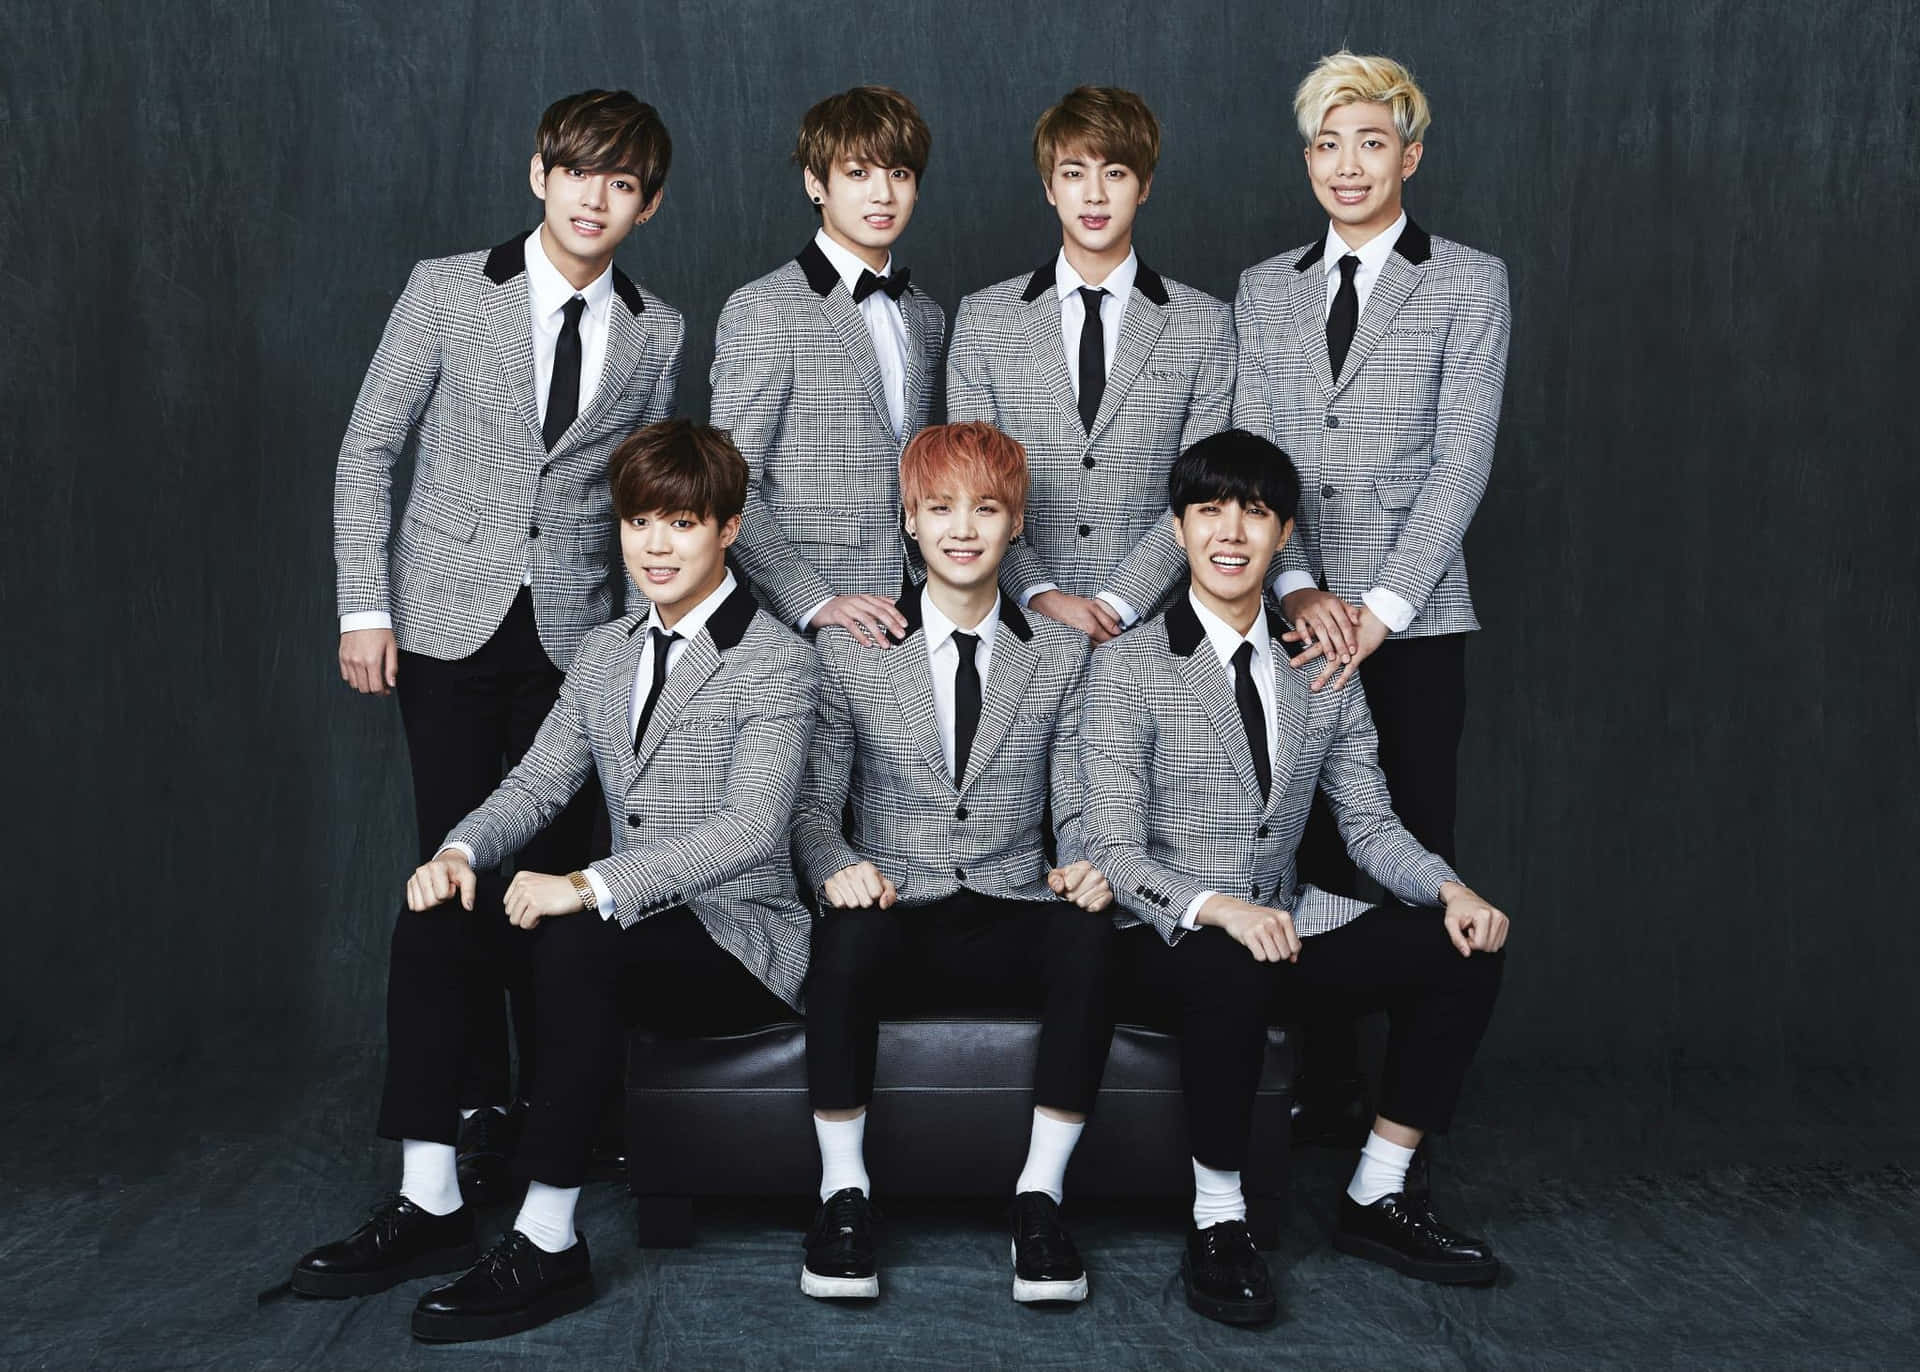 Bts Photoshoot Wearing Plaid Suits Background